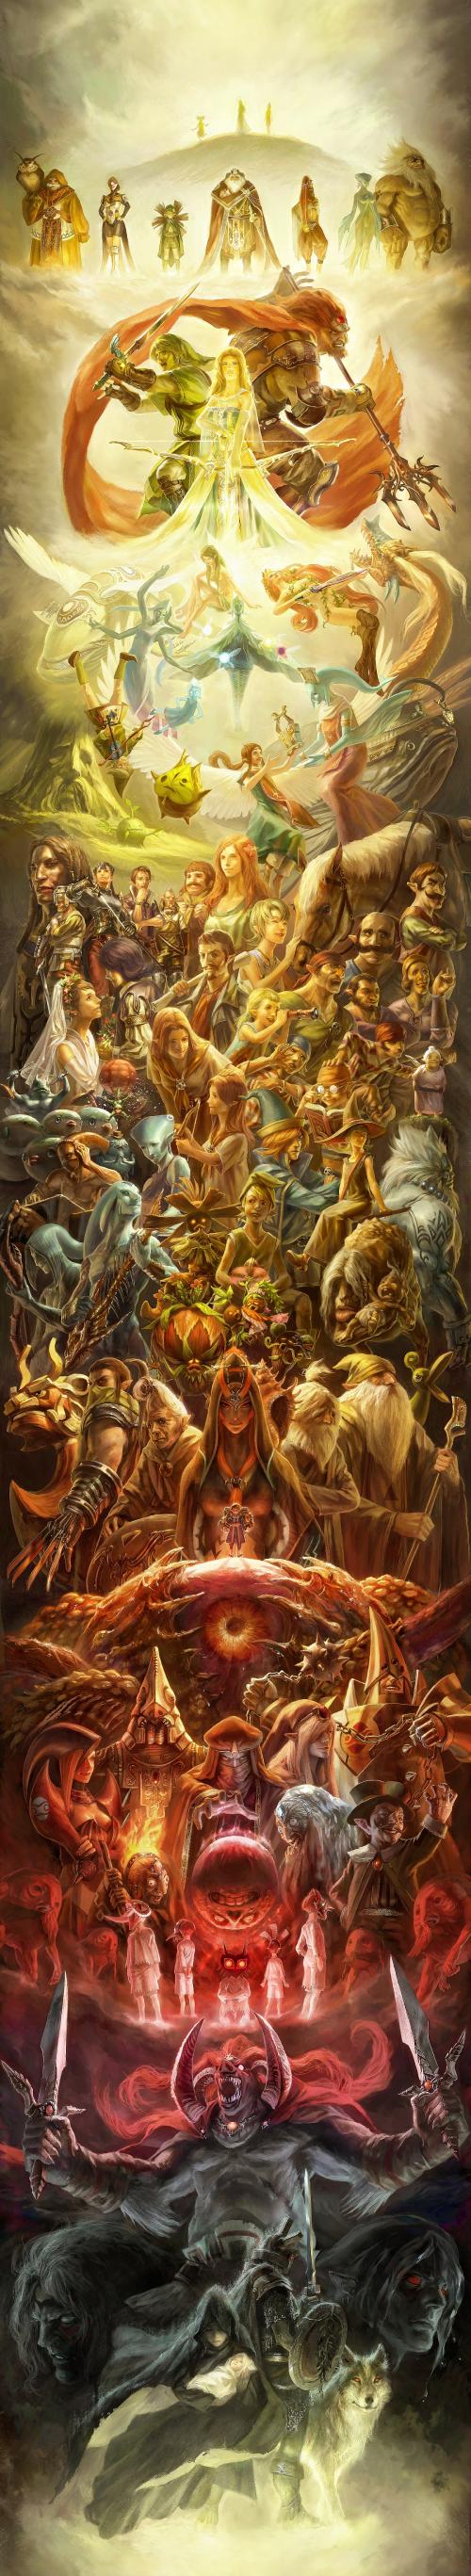 Image for Zelda Painting with Almost Everyone